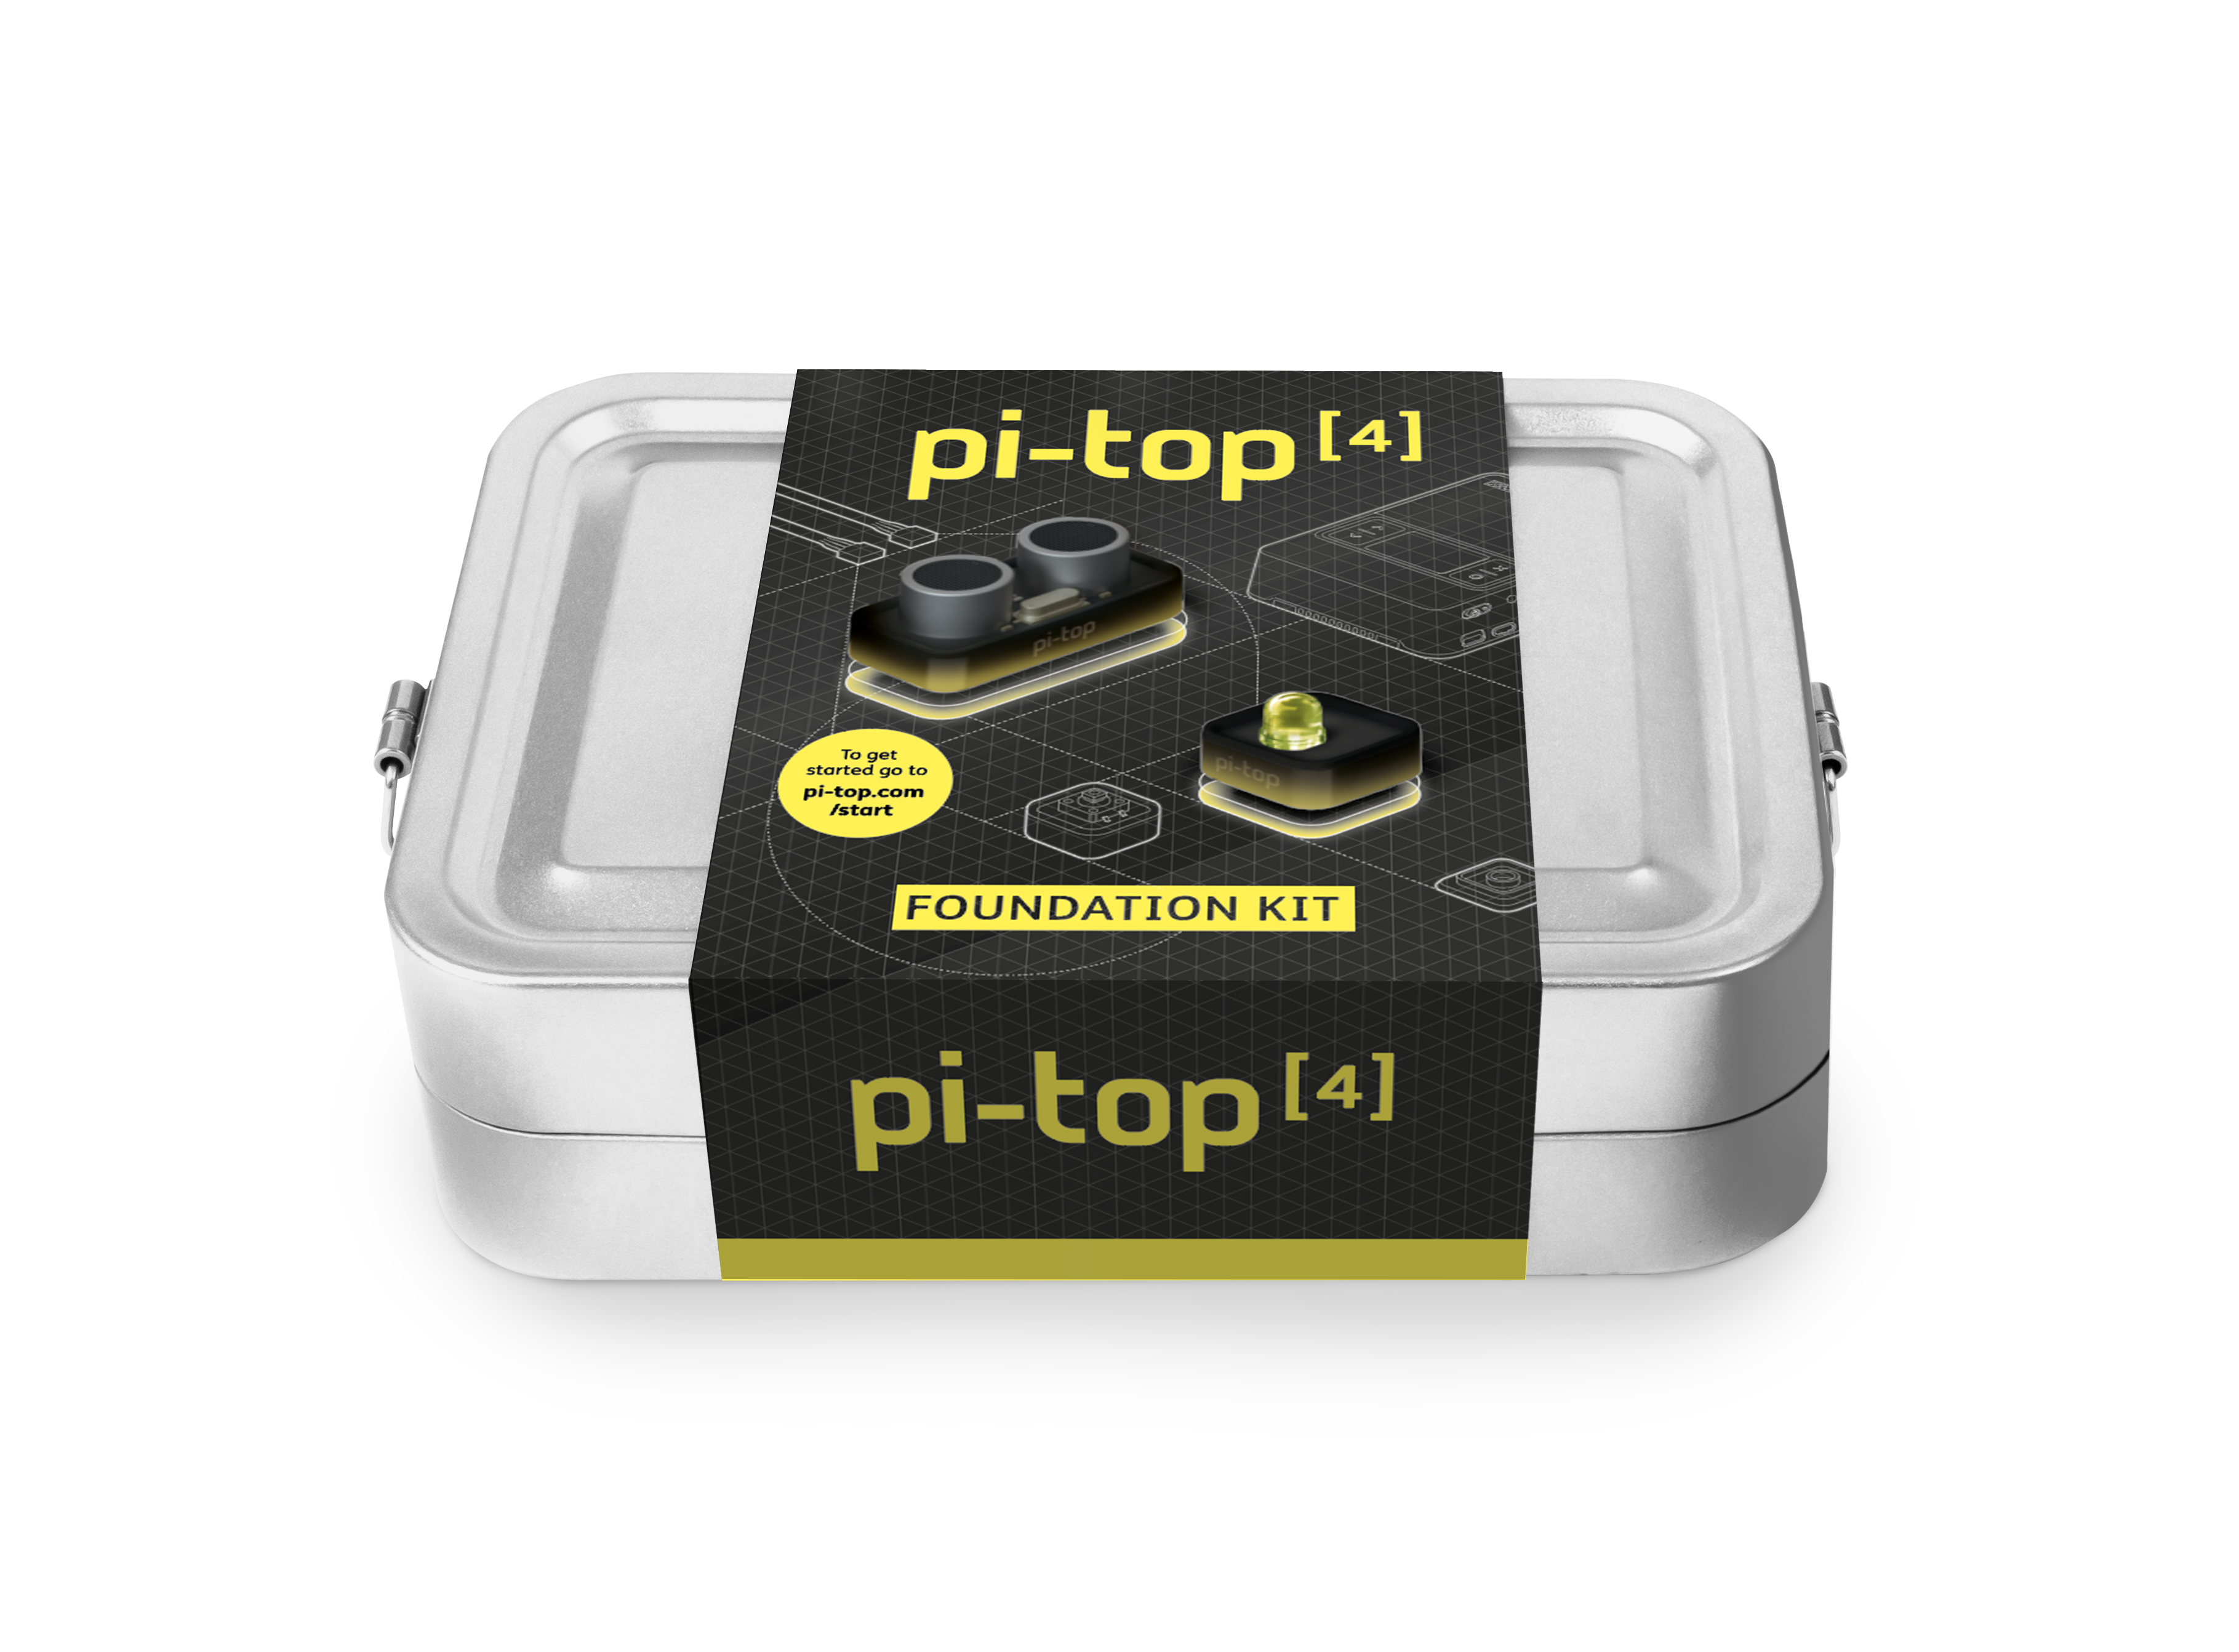 Pi-Top [4] Foundation kit with sensors and components